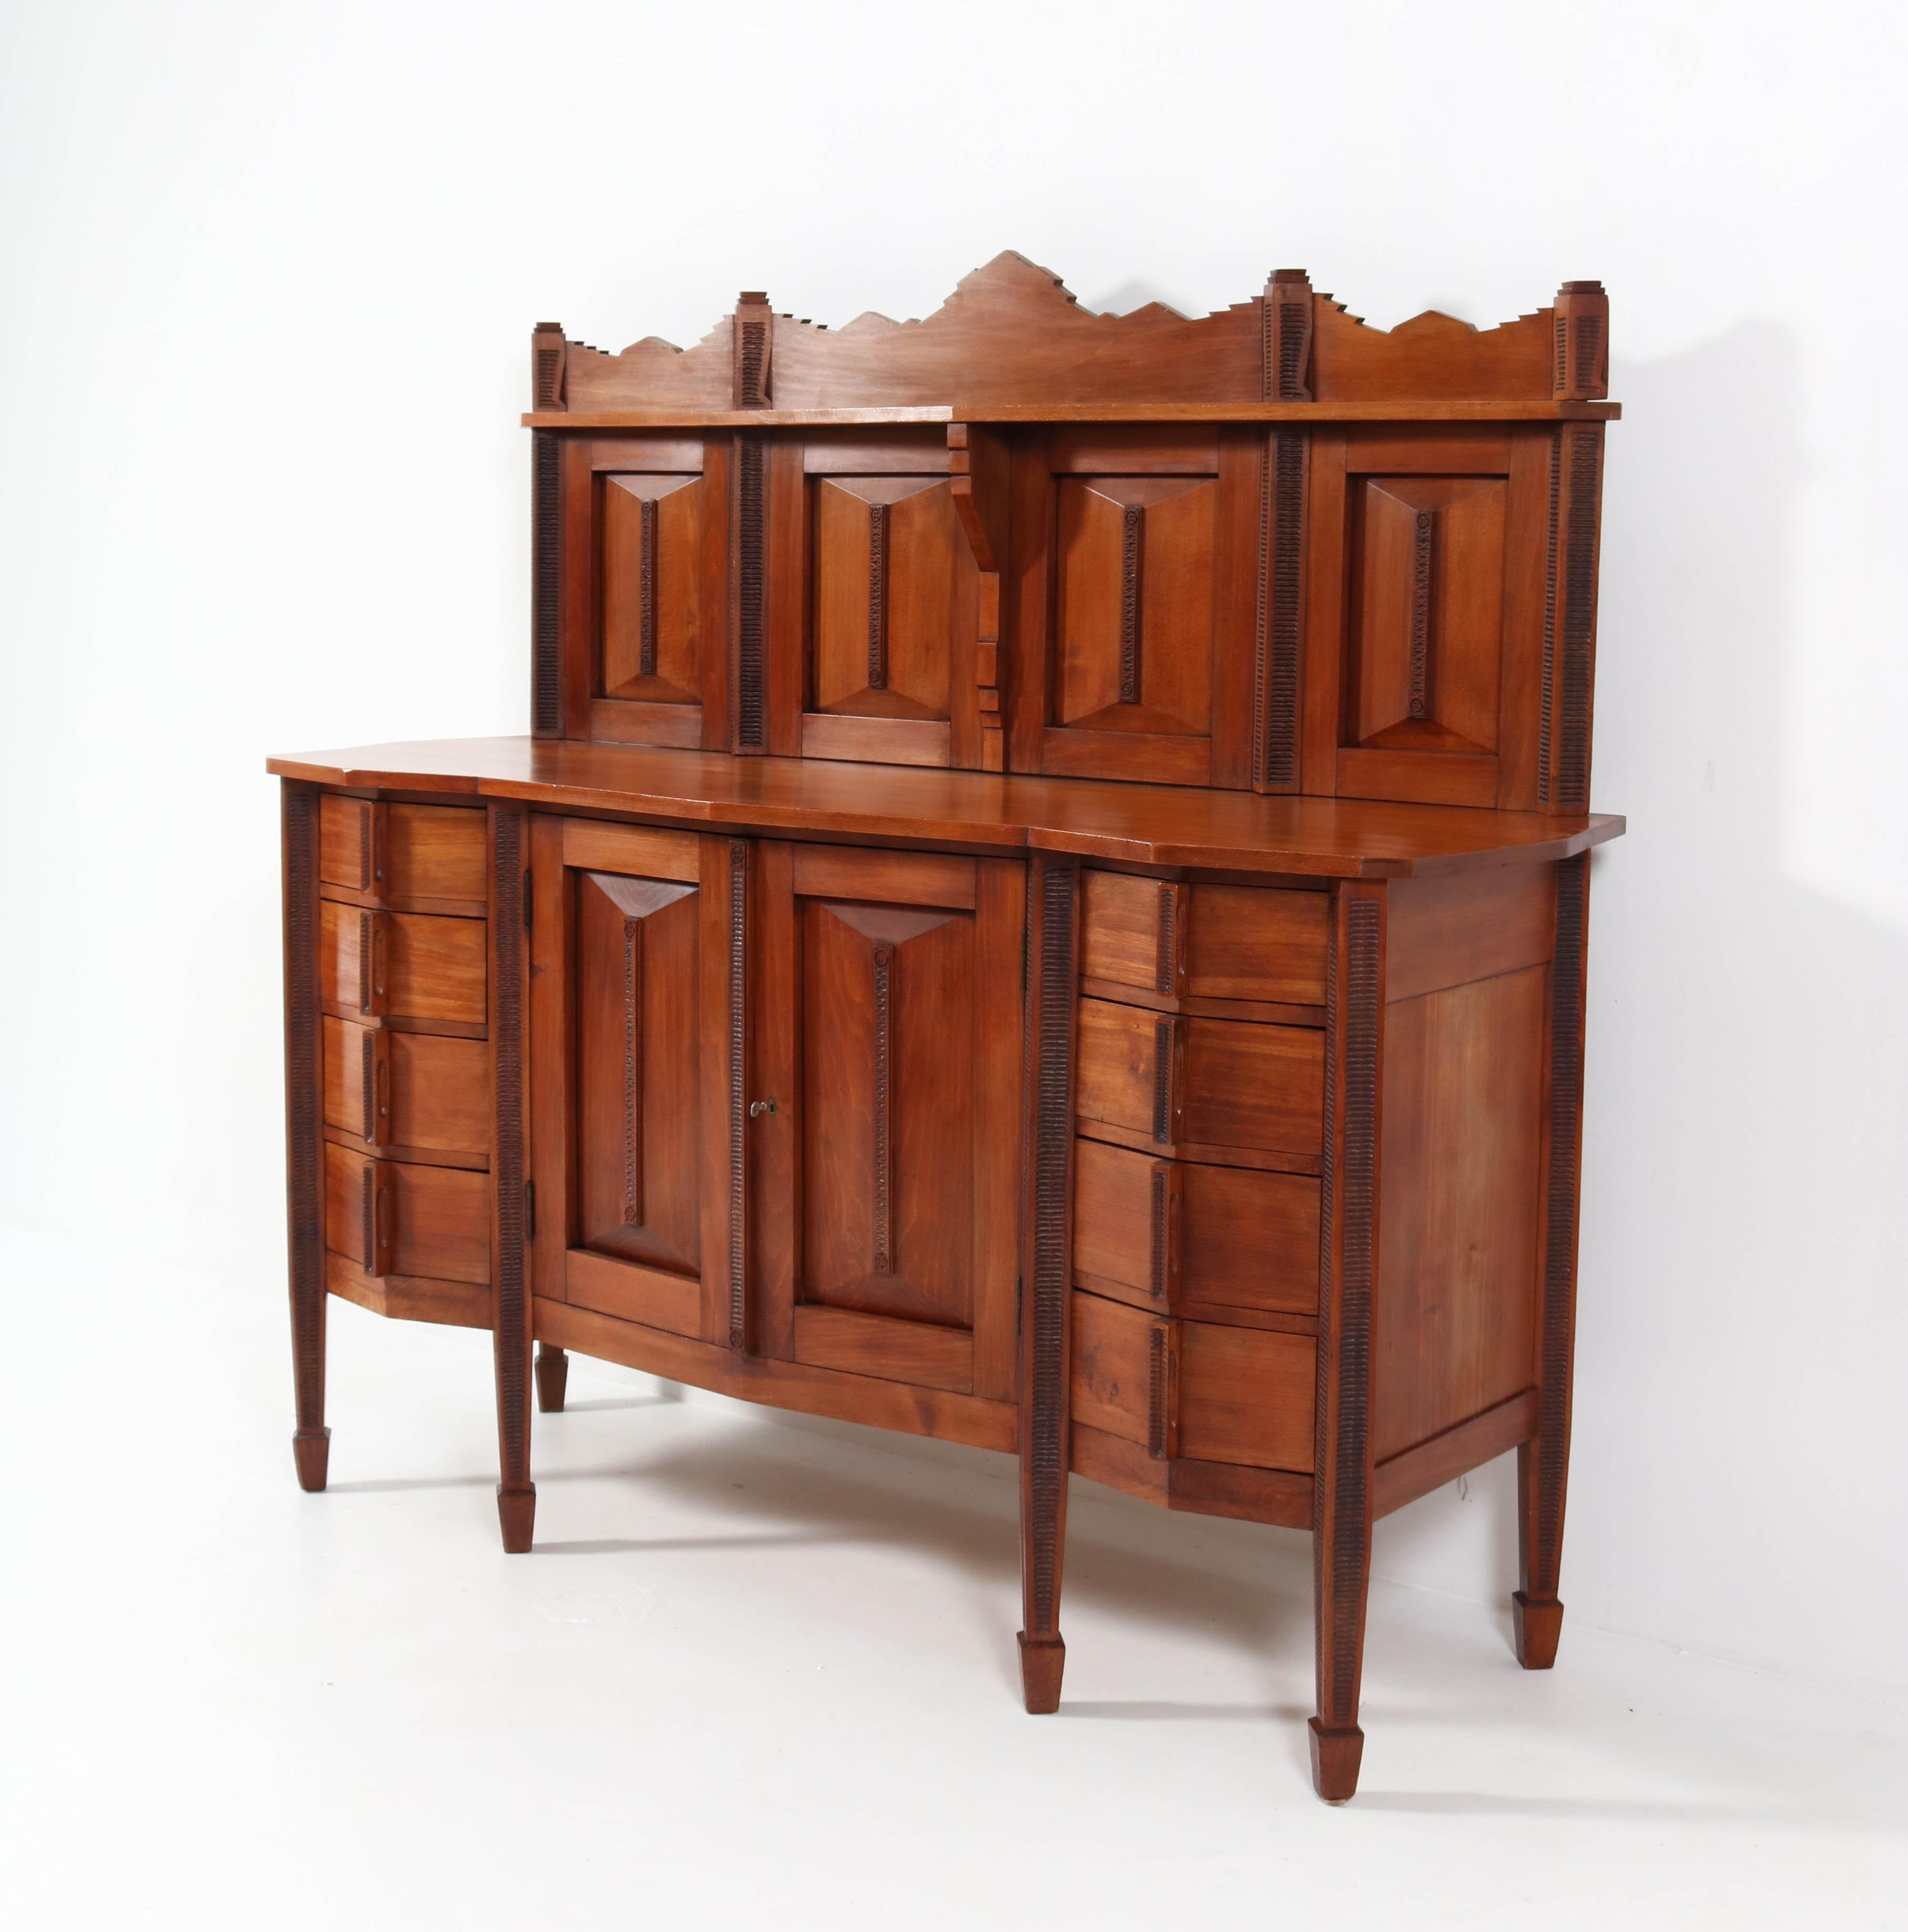 Magnificent and ultra rare Art Deco Amsterdamse School credenza or sideboard.
Striking Dutch design from the 1920s.
Solid stained beech.
This wonderful piece of furniture with its remarkable design is a true gem in a Amsterdamse School interior or